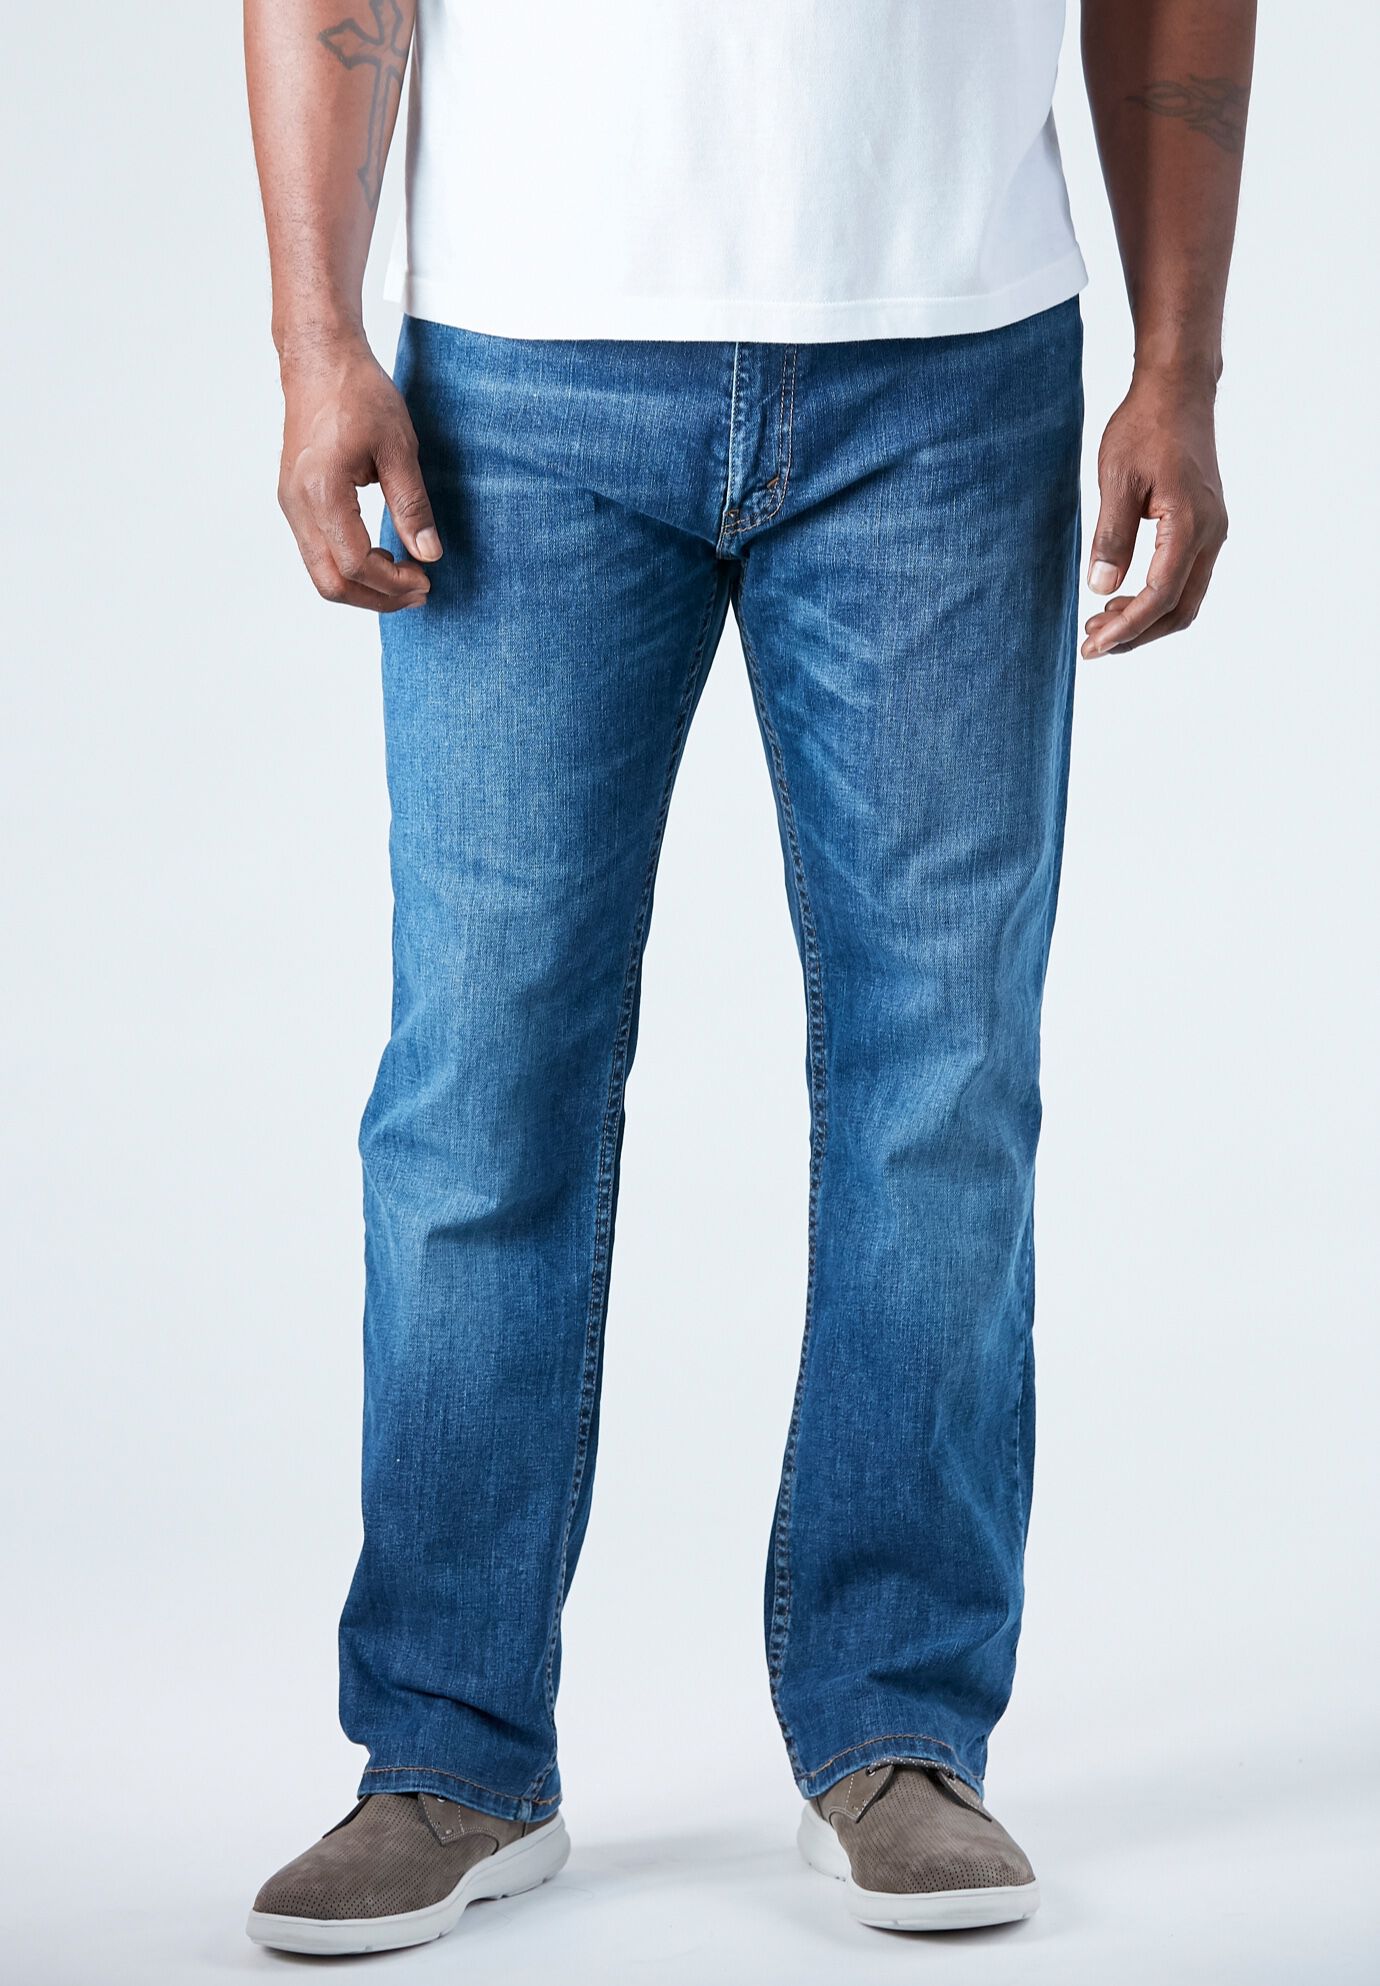 jeans similar to levis 559